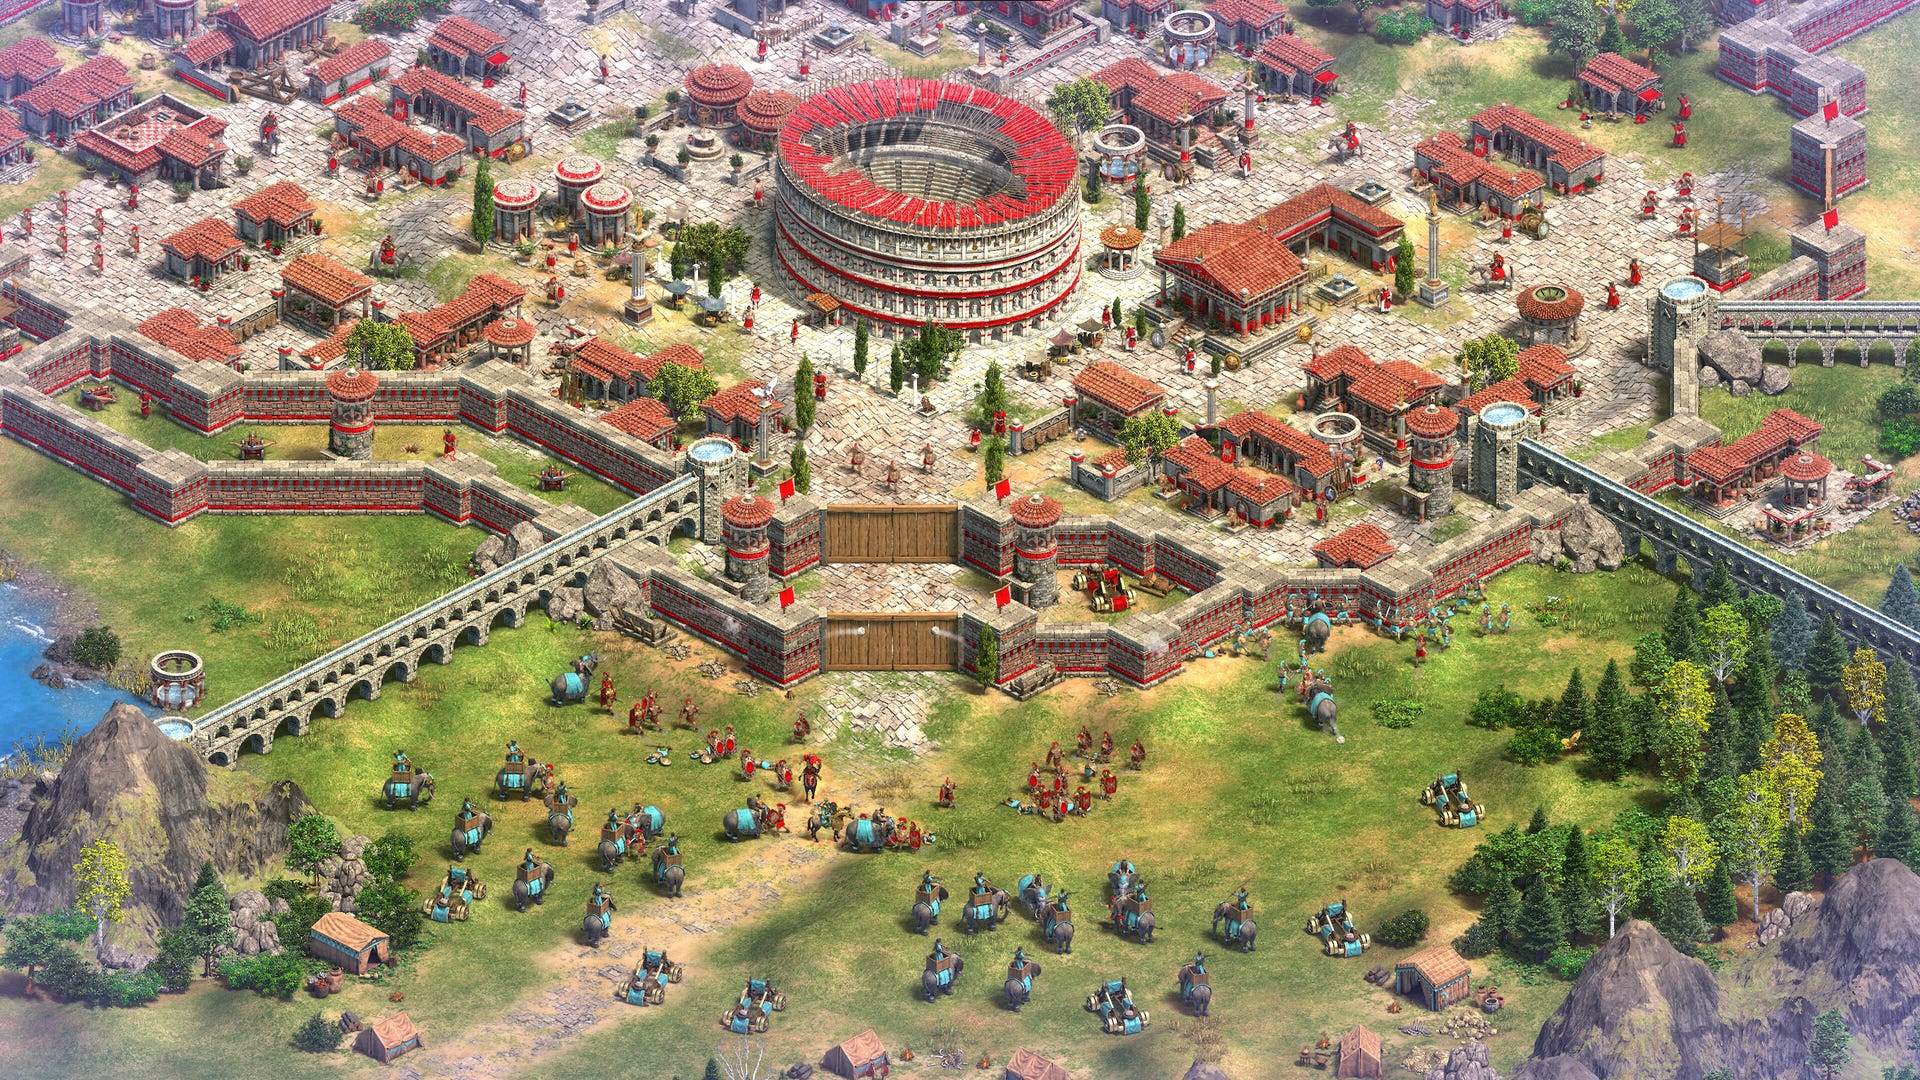 Scientists use Age of Empires 2 to investigate how ants wage war